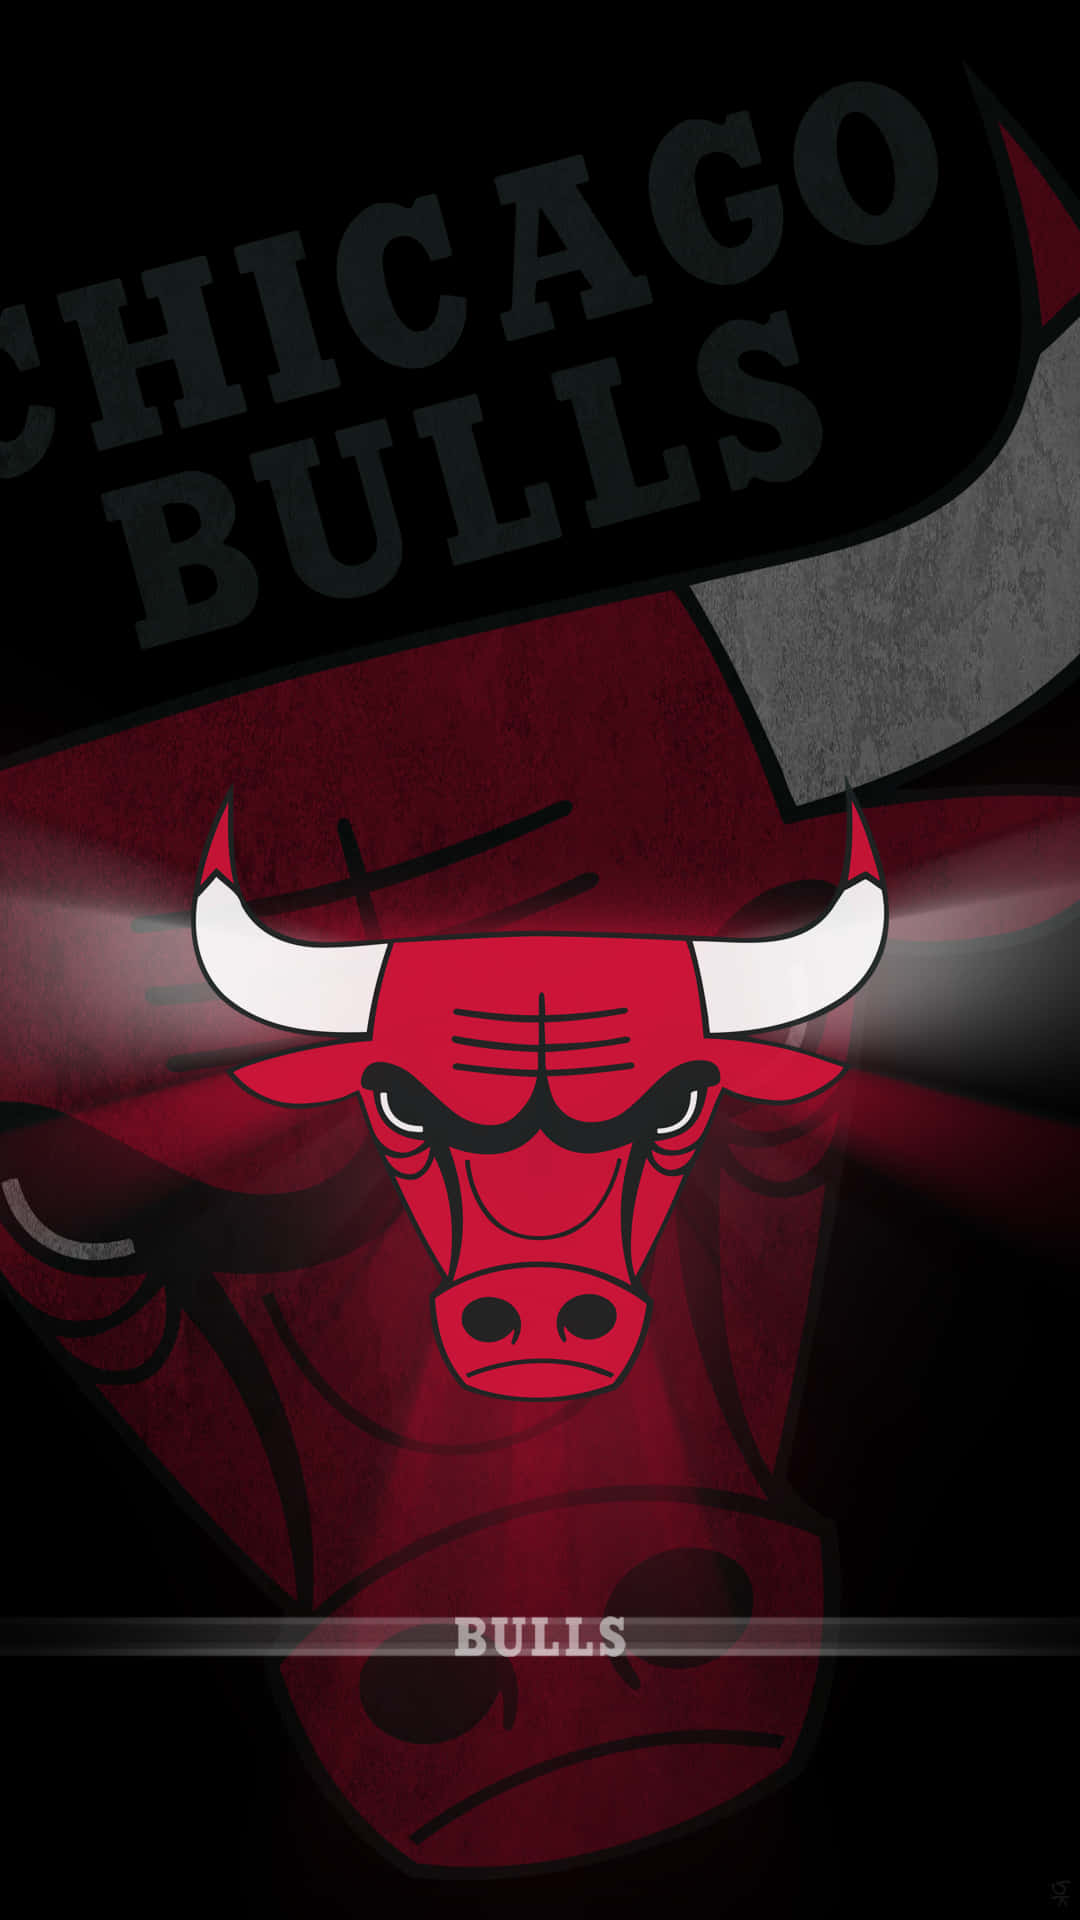 "Be A Part of the Chicago Bulls Team with a Bulls Iphone!" Wallpaper